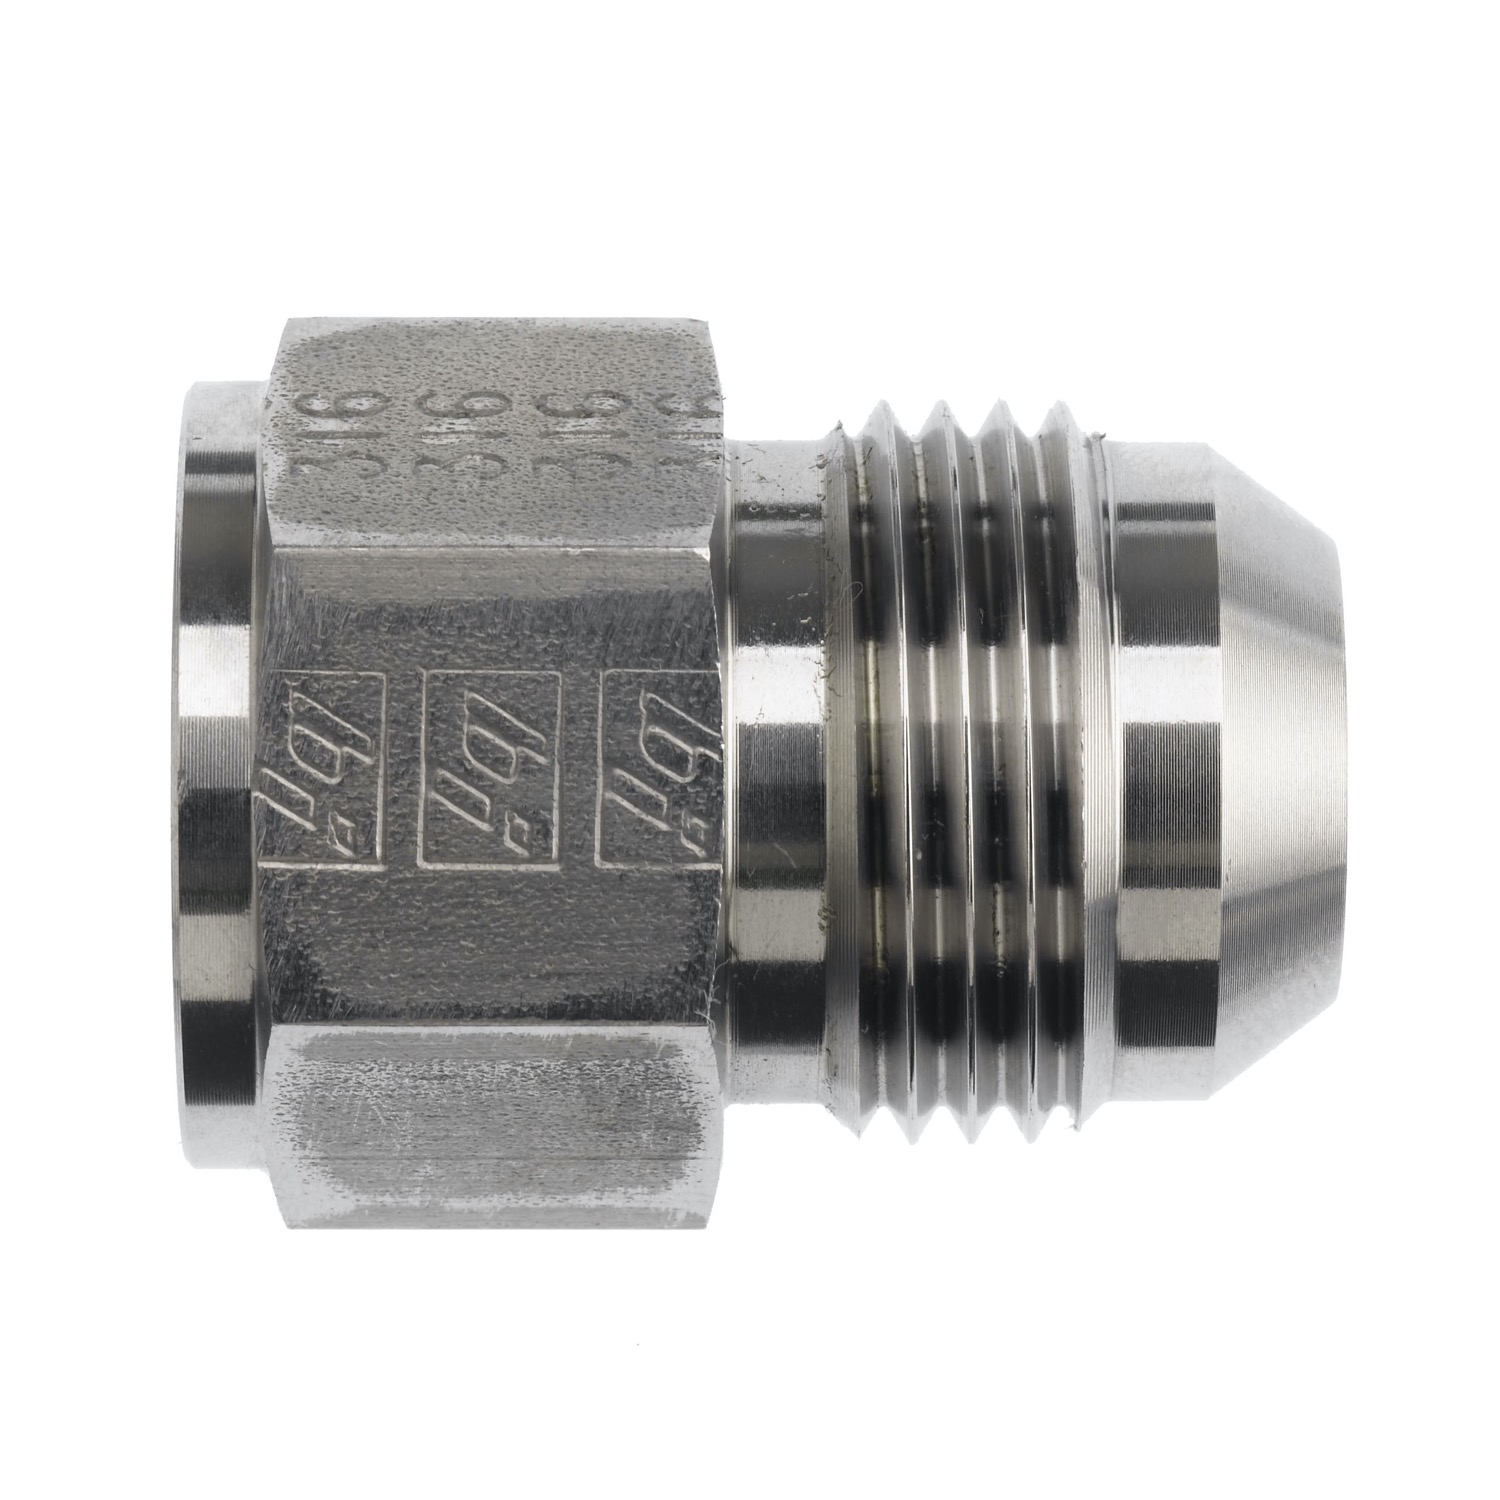 Hydraulic Hose Adapters - Straight Reducer Fitting, JIC 37° Flare, 2406 Series